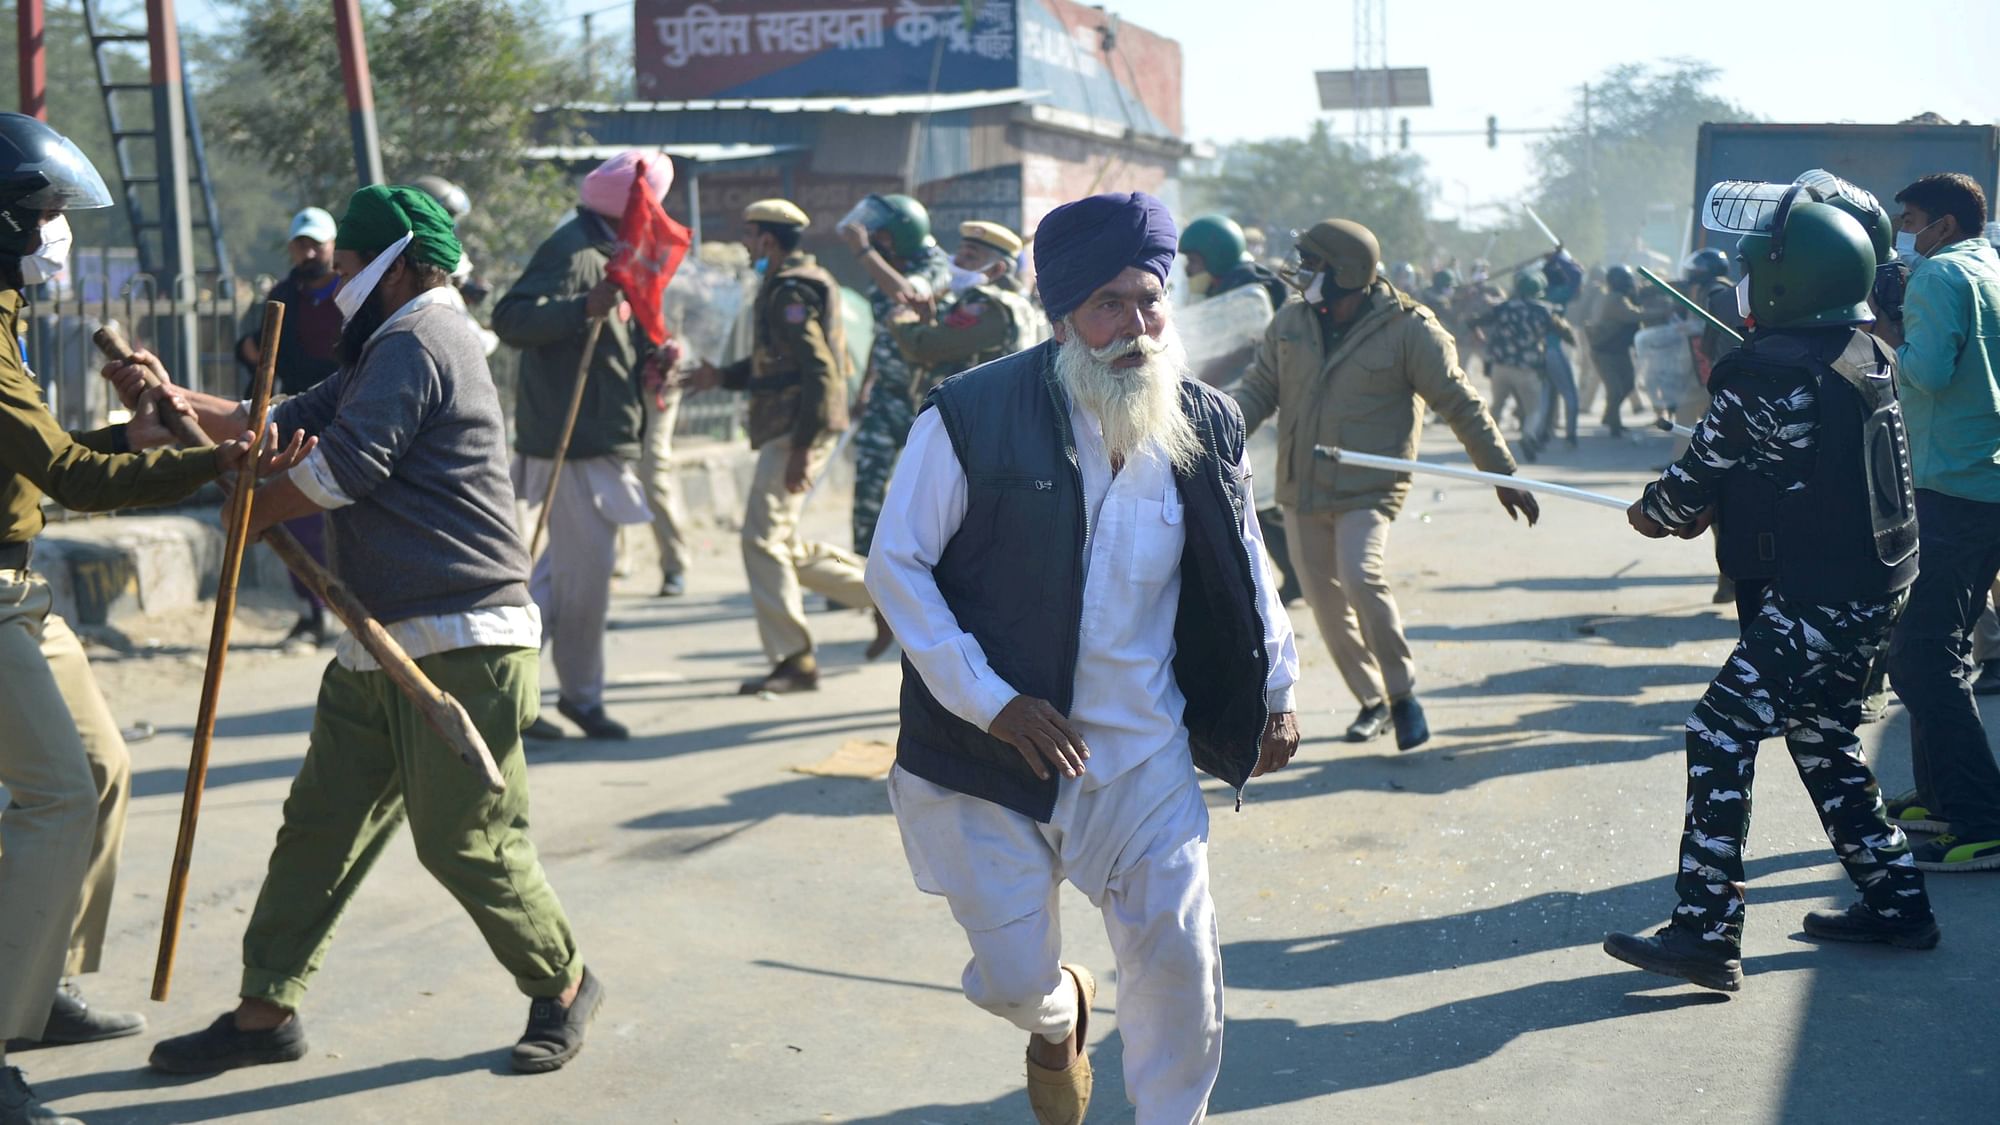 Catch all live updates of the farmers’ protests here.